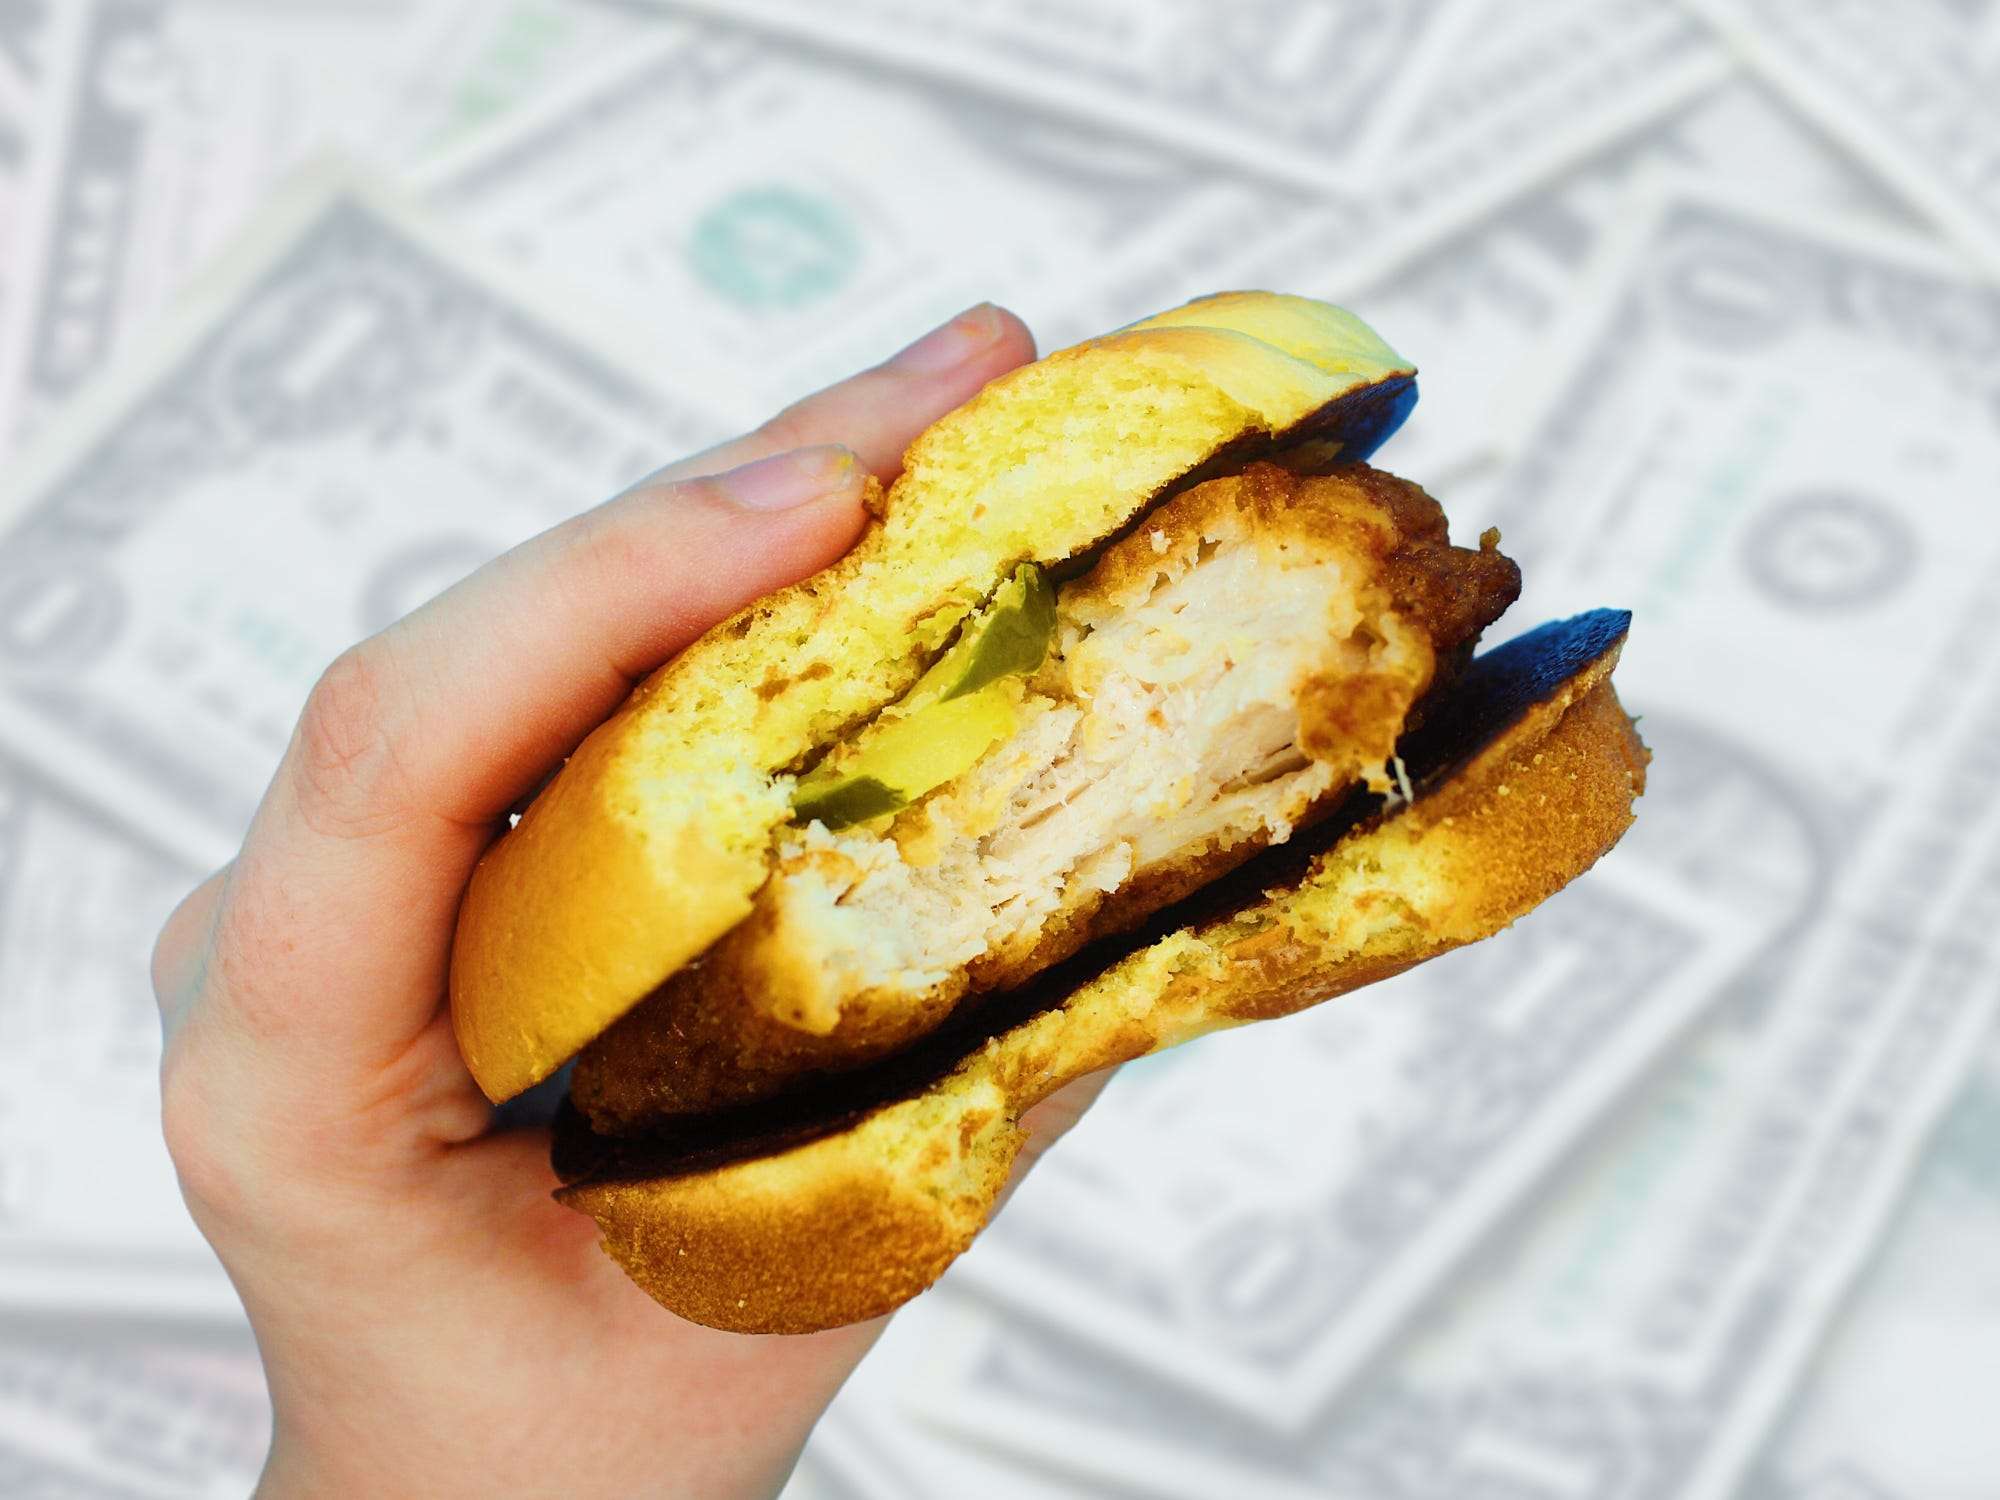 The fastfood chicken sandwich wars have reached a new boiling point